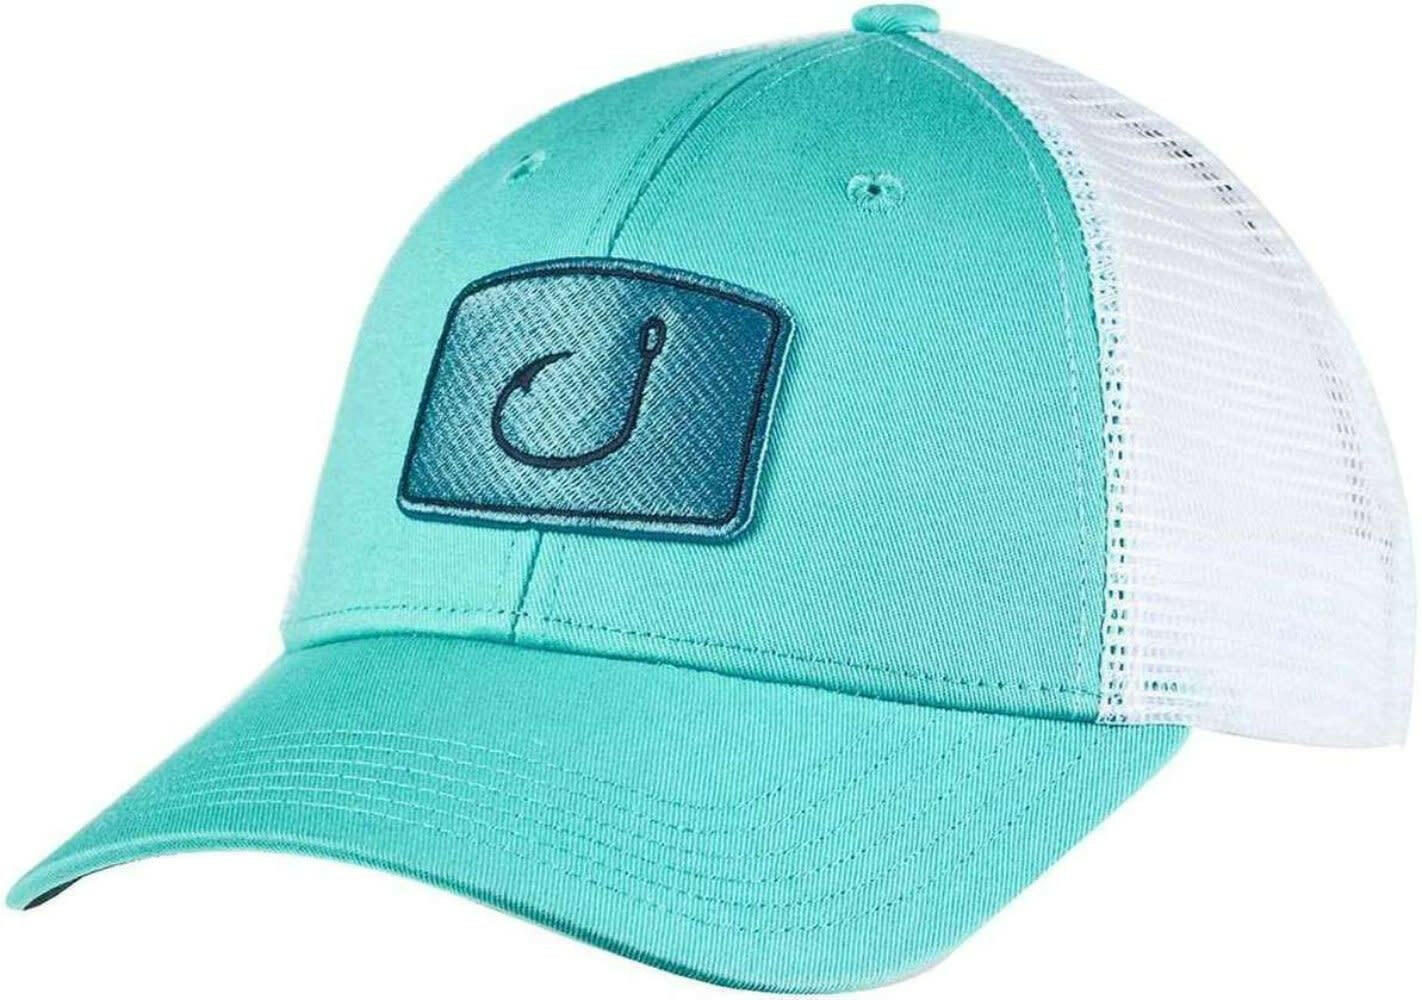 Avid Iconic Mesh Fitted Hat Seafoam S/M